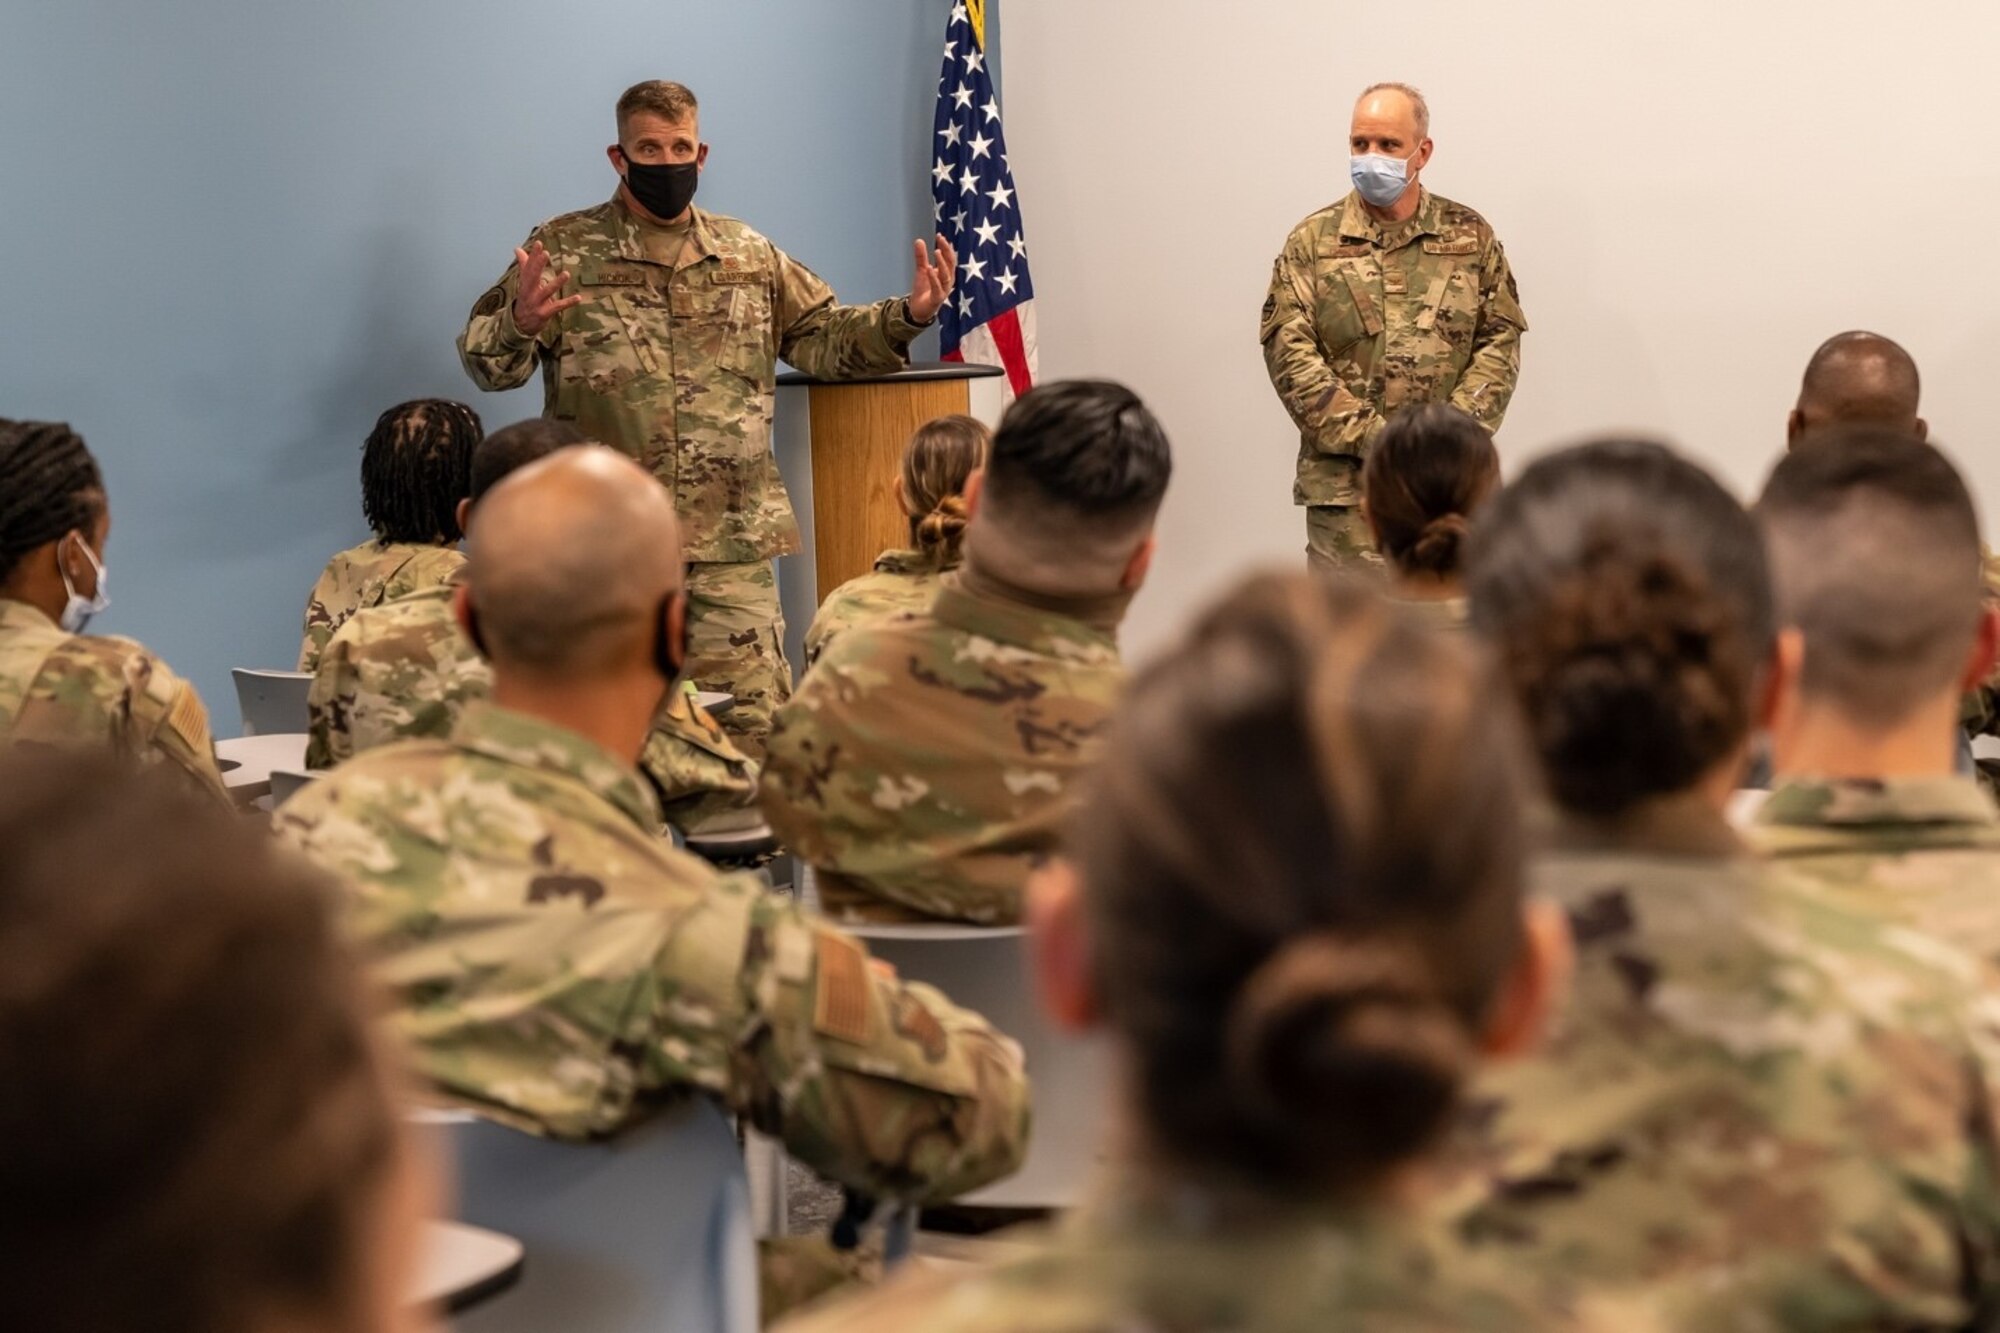 Maj. Gen. John Hickok, Air Force Reserve COVID-19 team lead, speaks to 482nd Medical Squadron personnel to thank them for all their hard work at Homestead Air Reserve Base, Fla., Nov. 6. (U.S. Air Force photo by Tech. Sgt. Lionel Castellano)